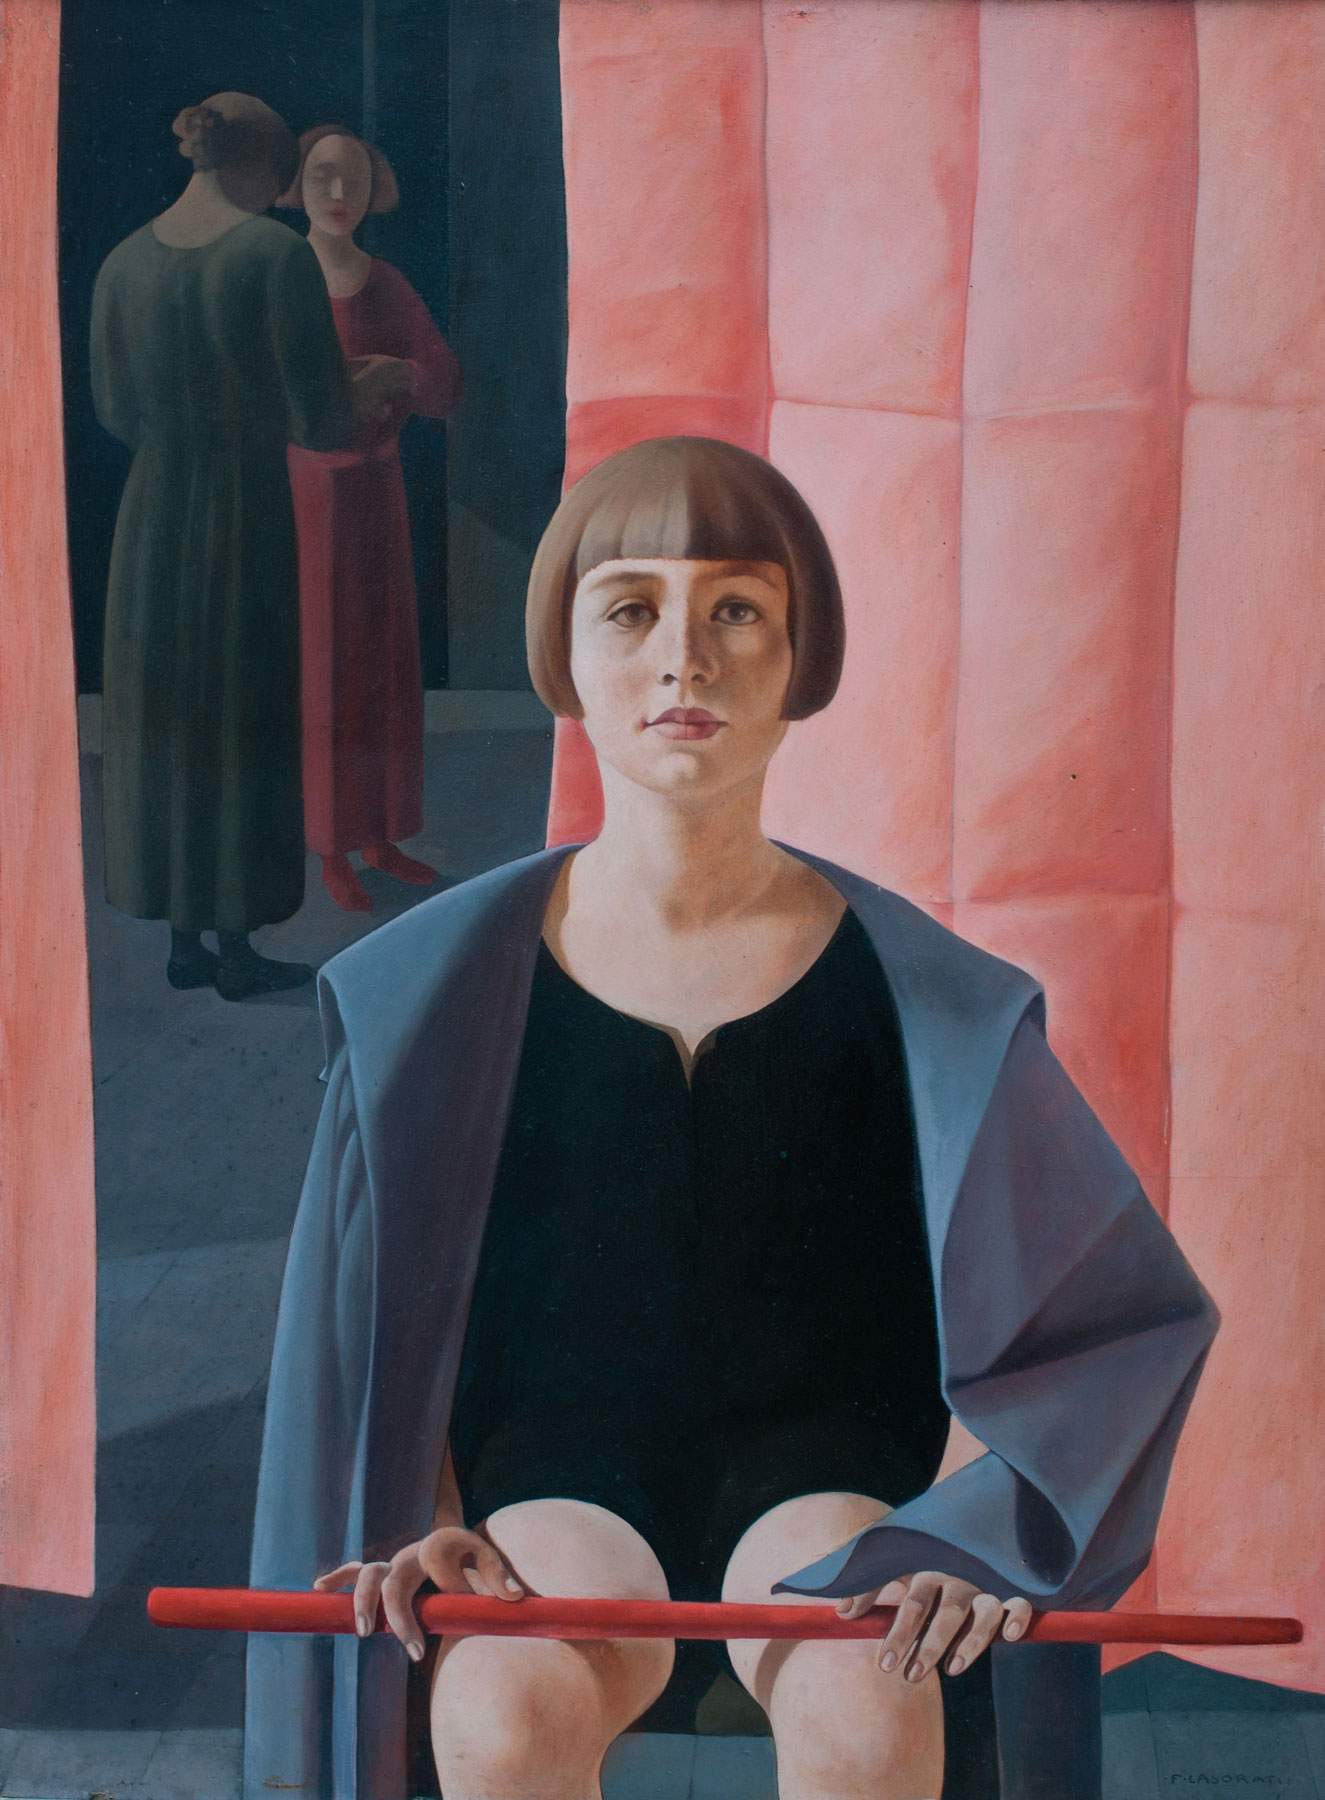 Felice Casorati, life and works of the great painter of Magic Realism 